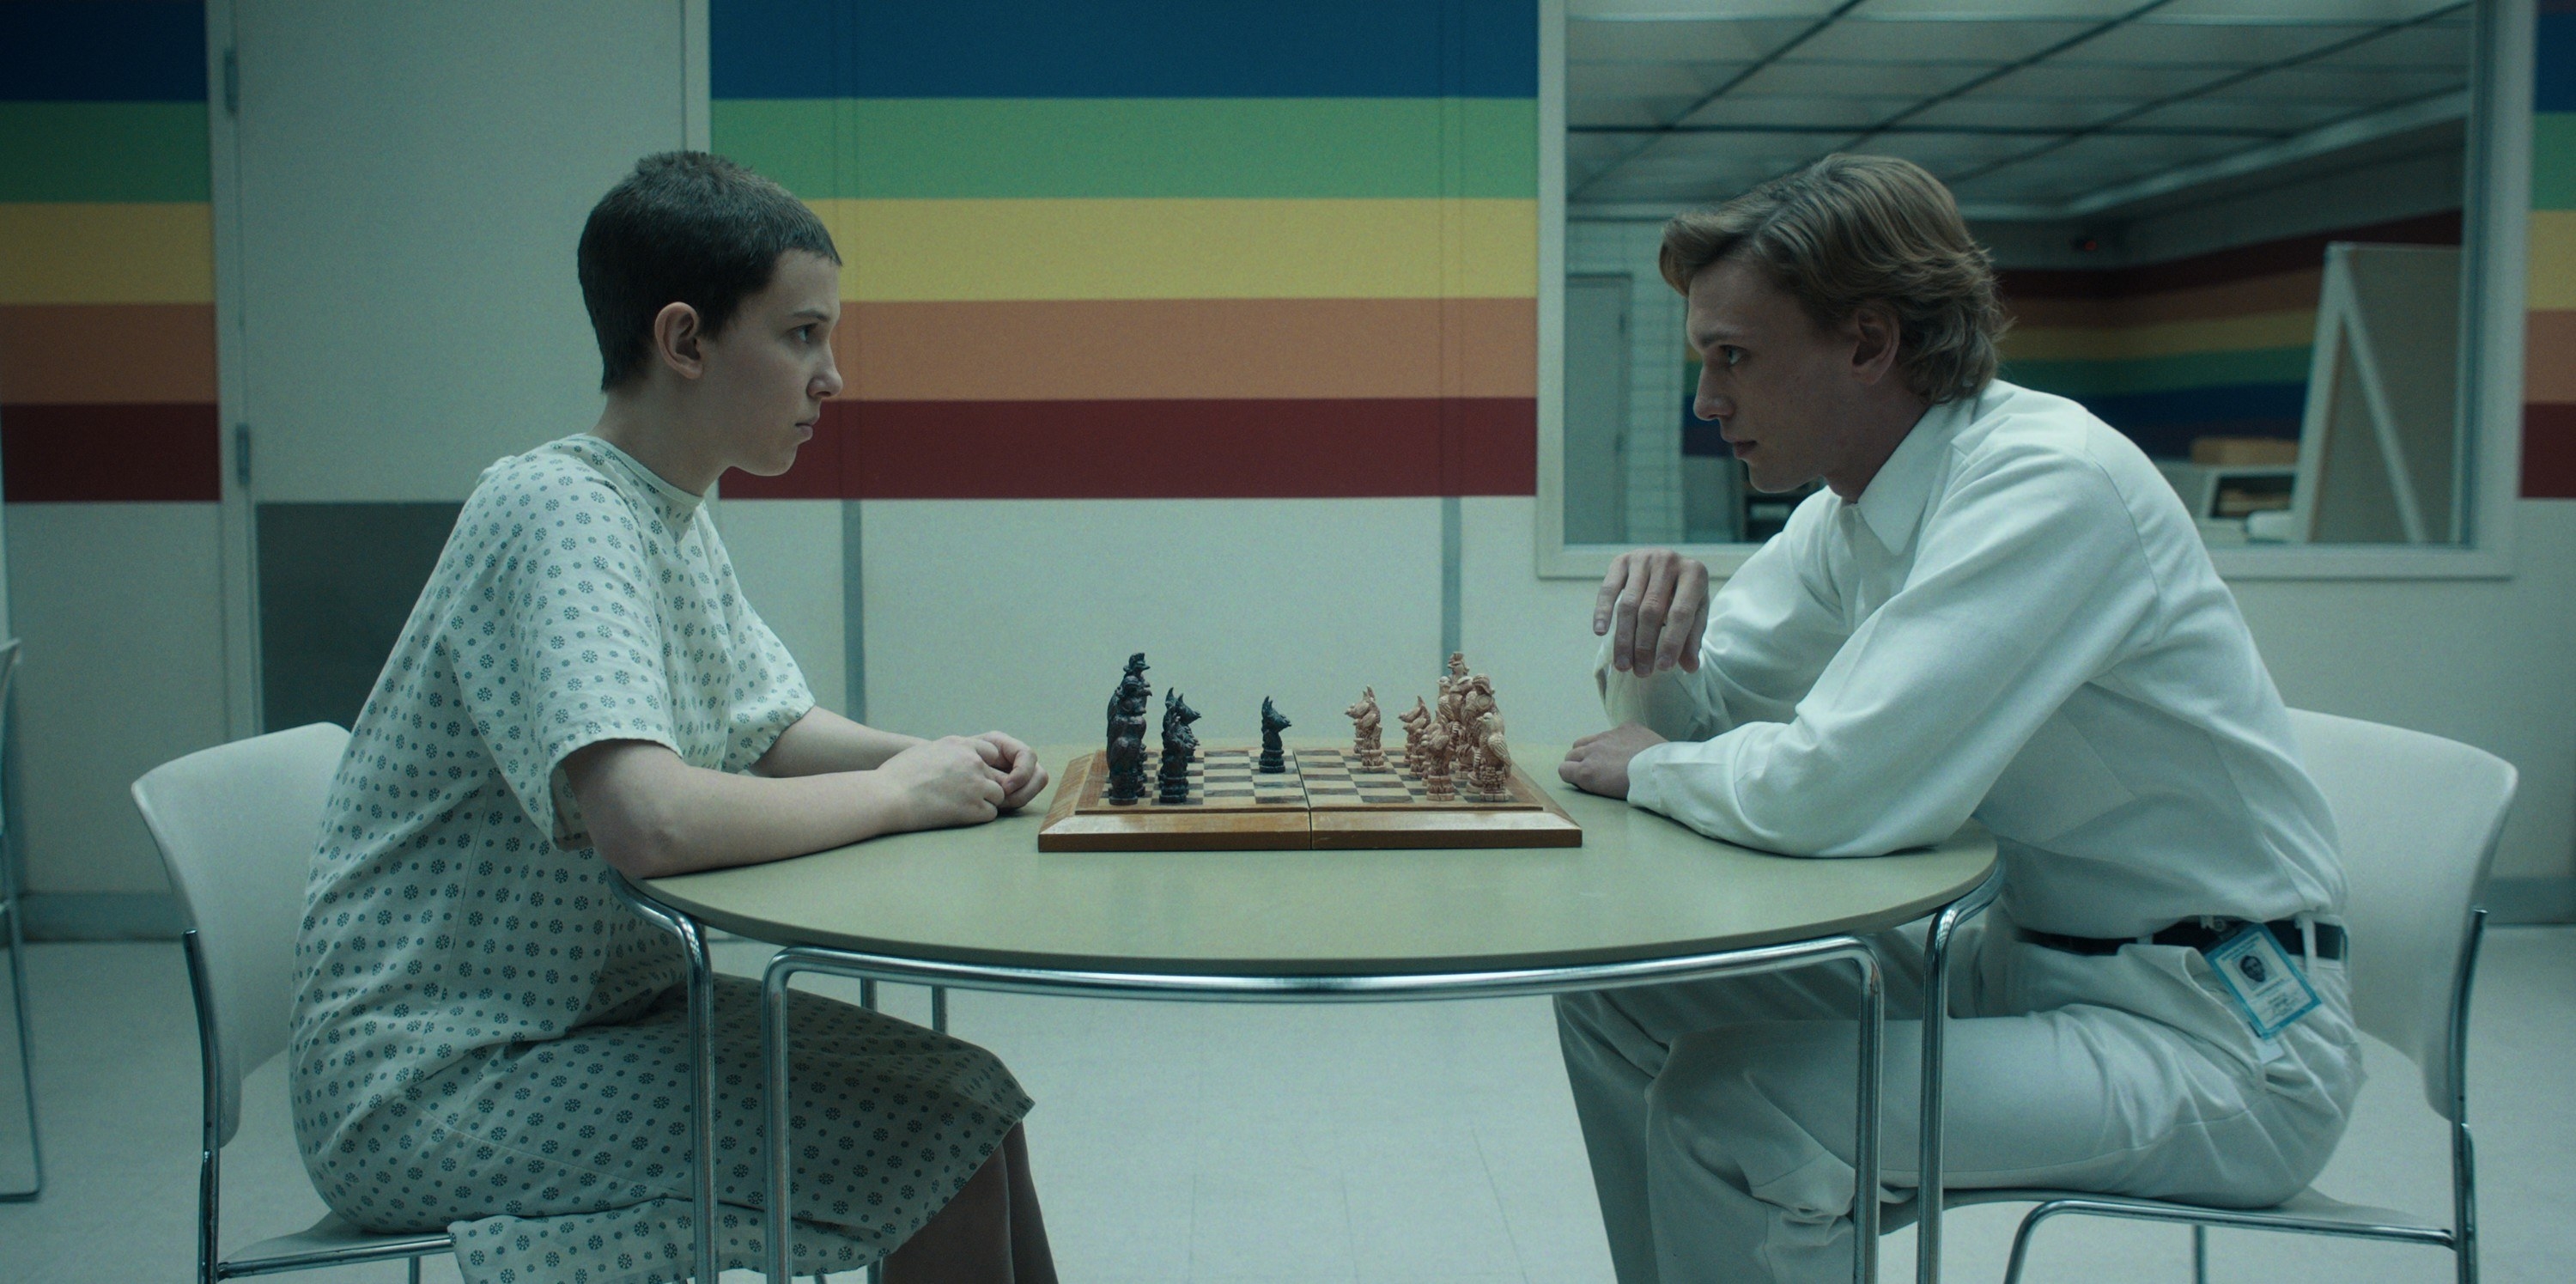 Eleven with her head shaved again wearing a hospital gown and playing chess with One who is wearing an administrators uniform